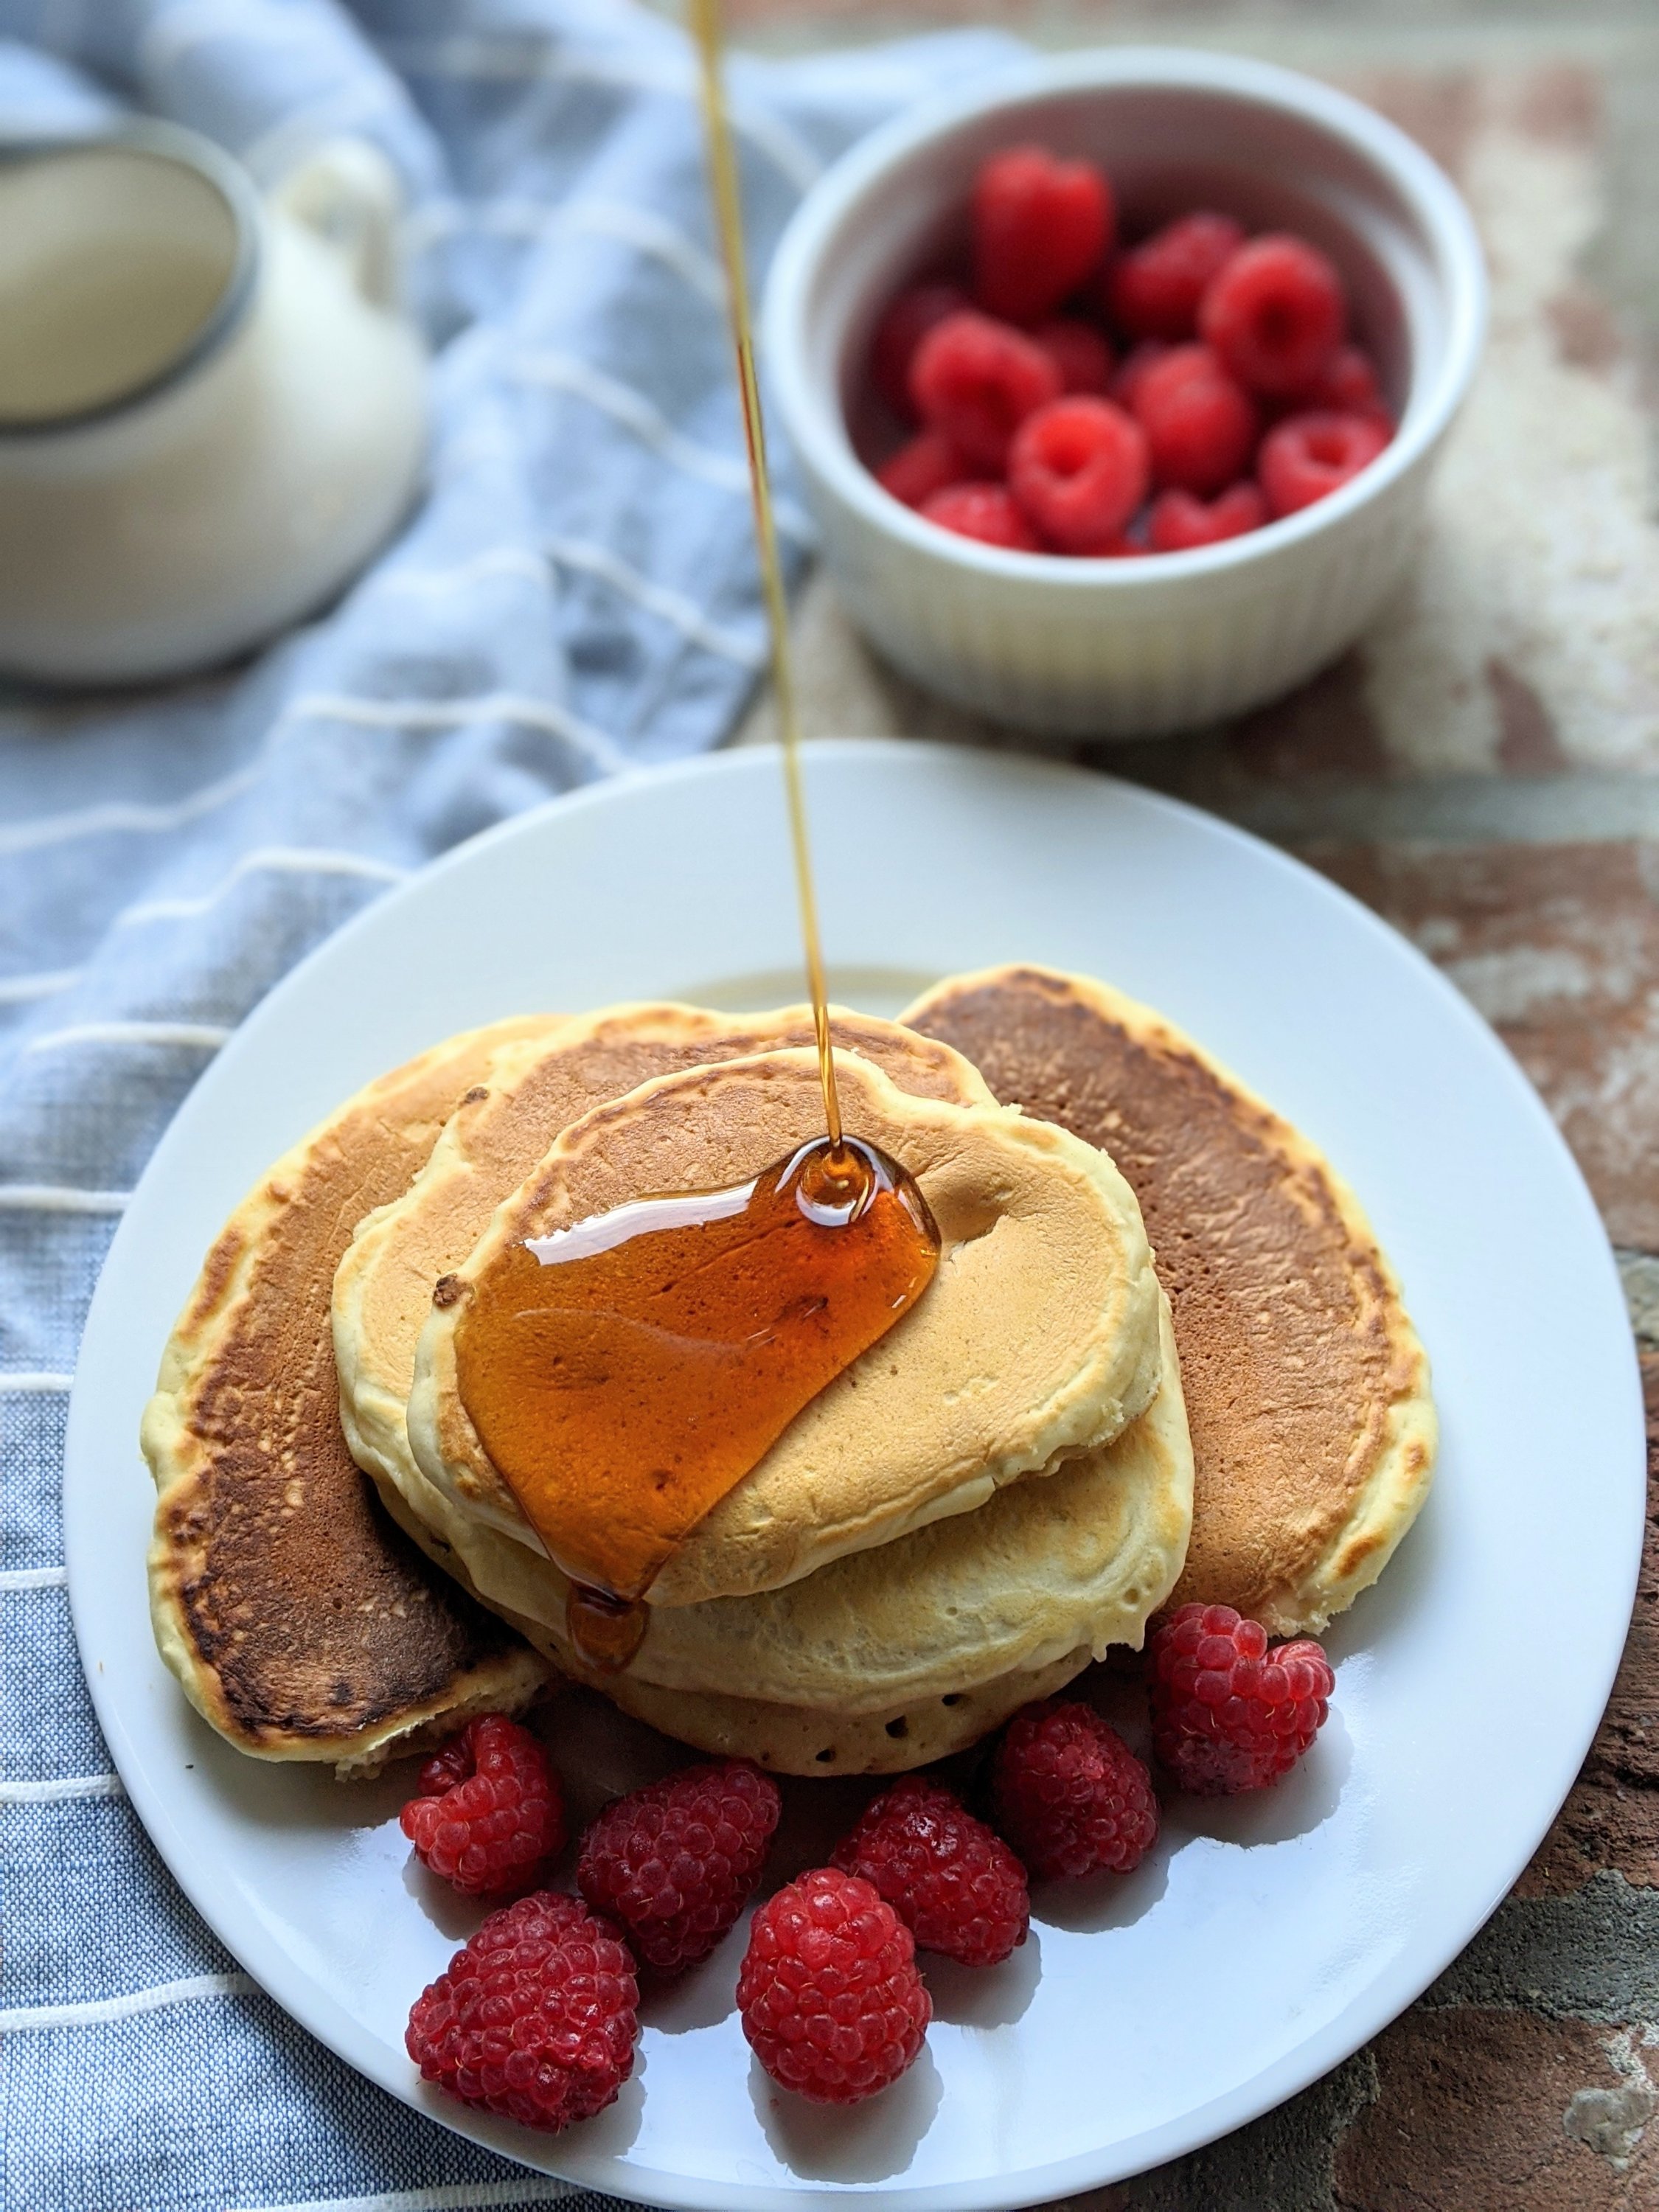 substitute for fresh buttermilk recipe healthy homemade powdered buttermilk powder pancakes recipe easy weekend brunches for kids and families children will love adults too